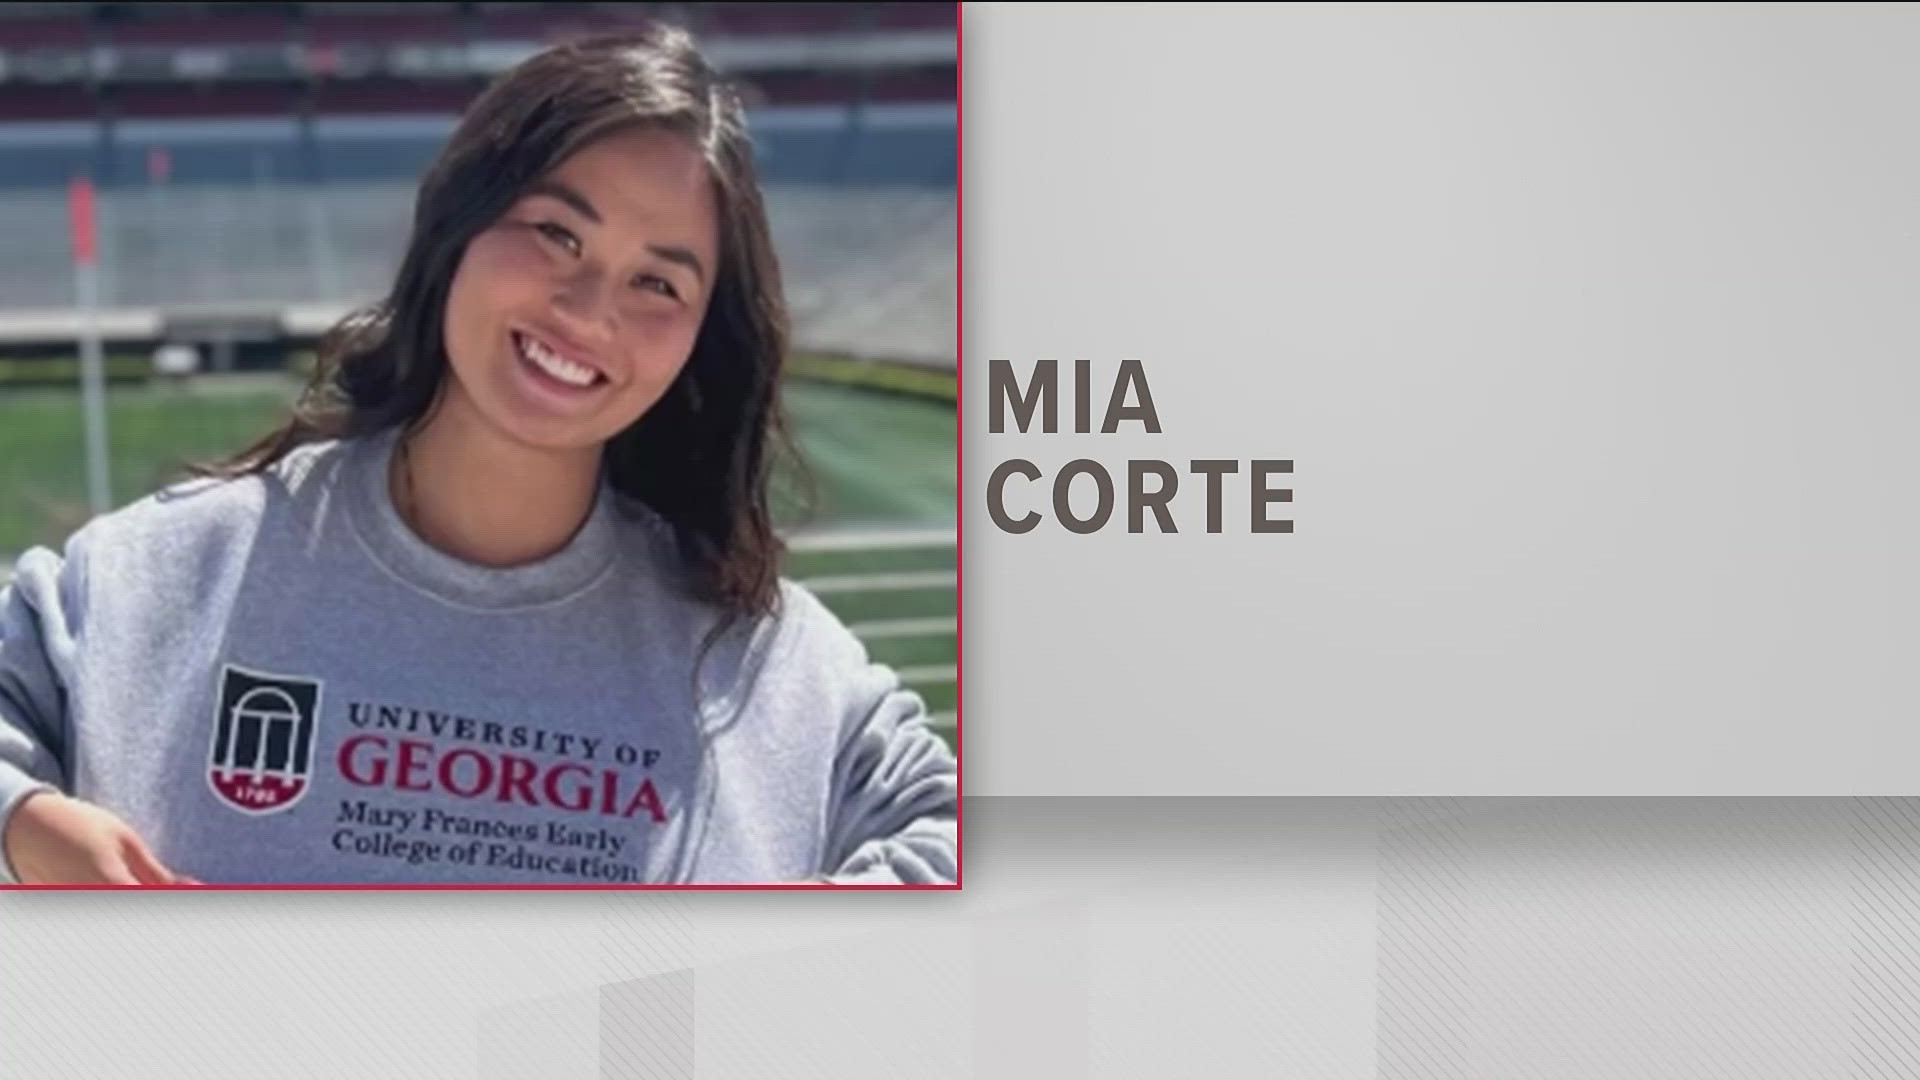 Officials said 20-year-old Mia Corte became trapped under the tree after it was uprooted during a strong storm, with winds reaching up to 64 miles per hour.